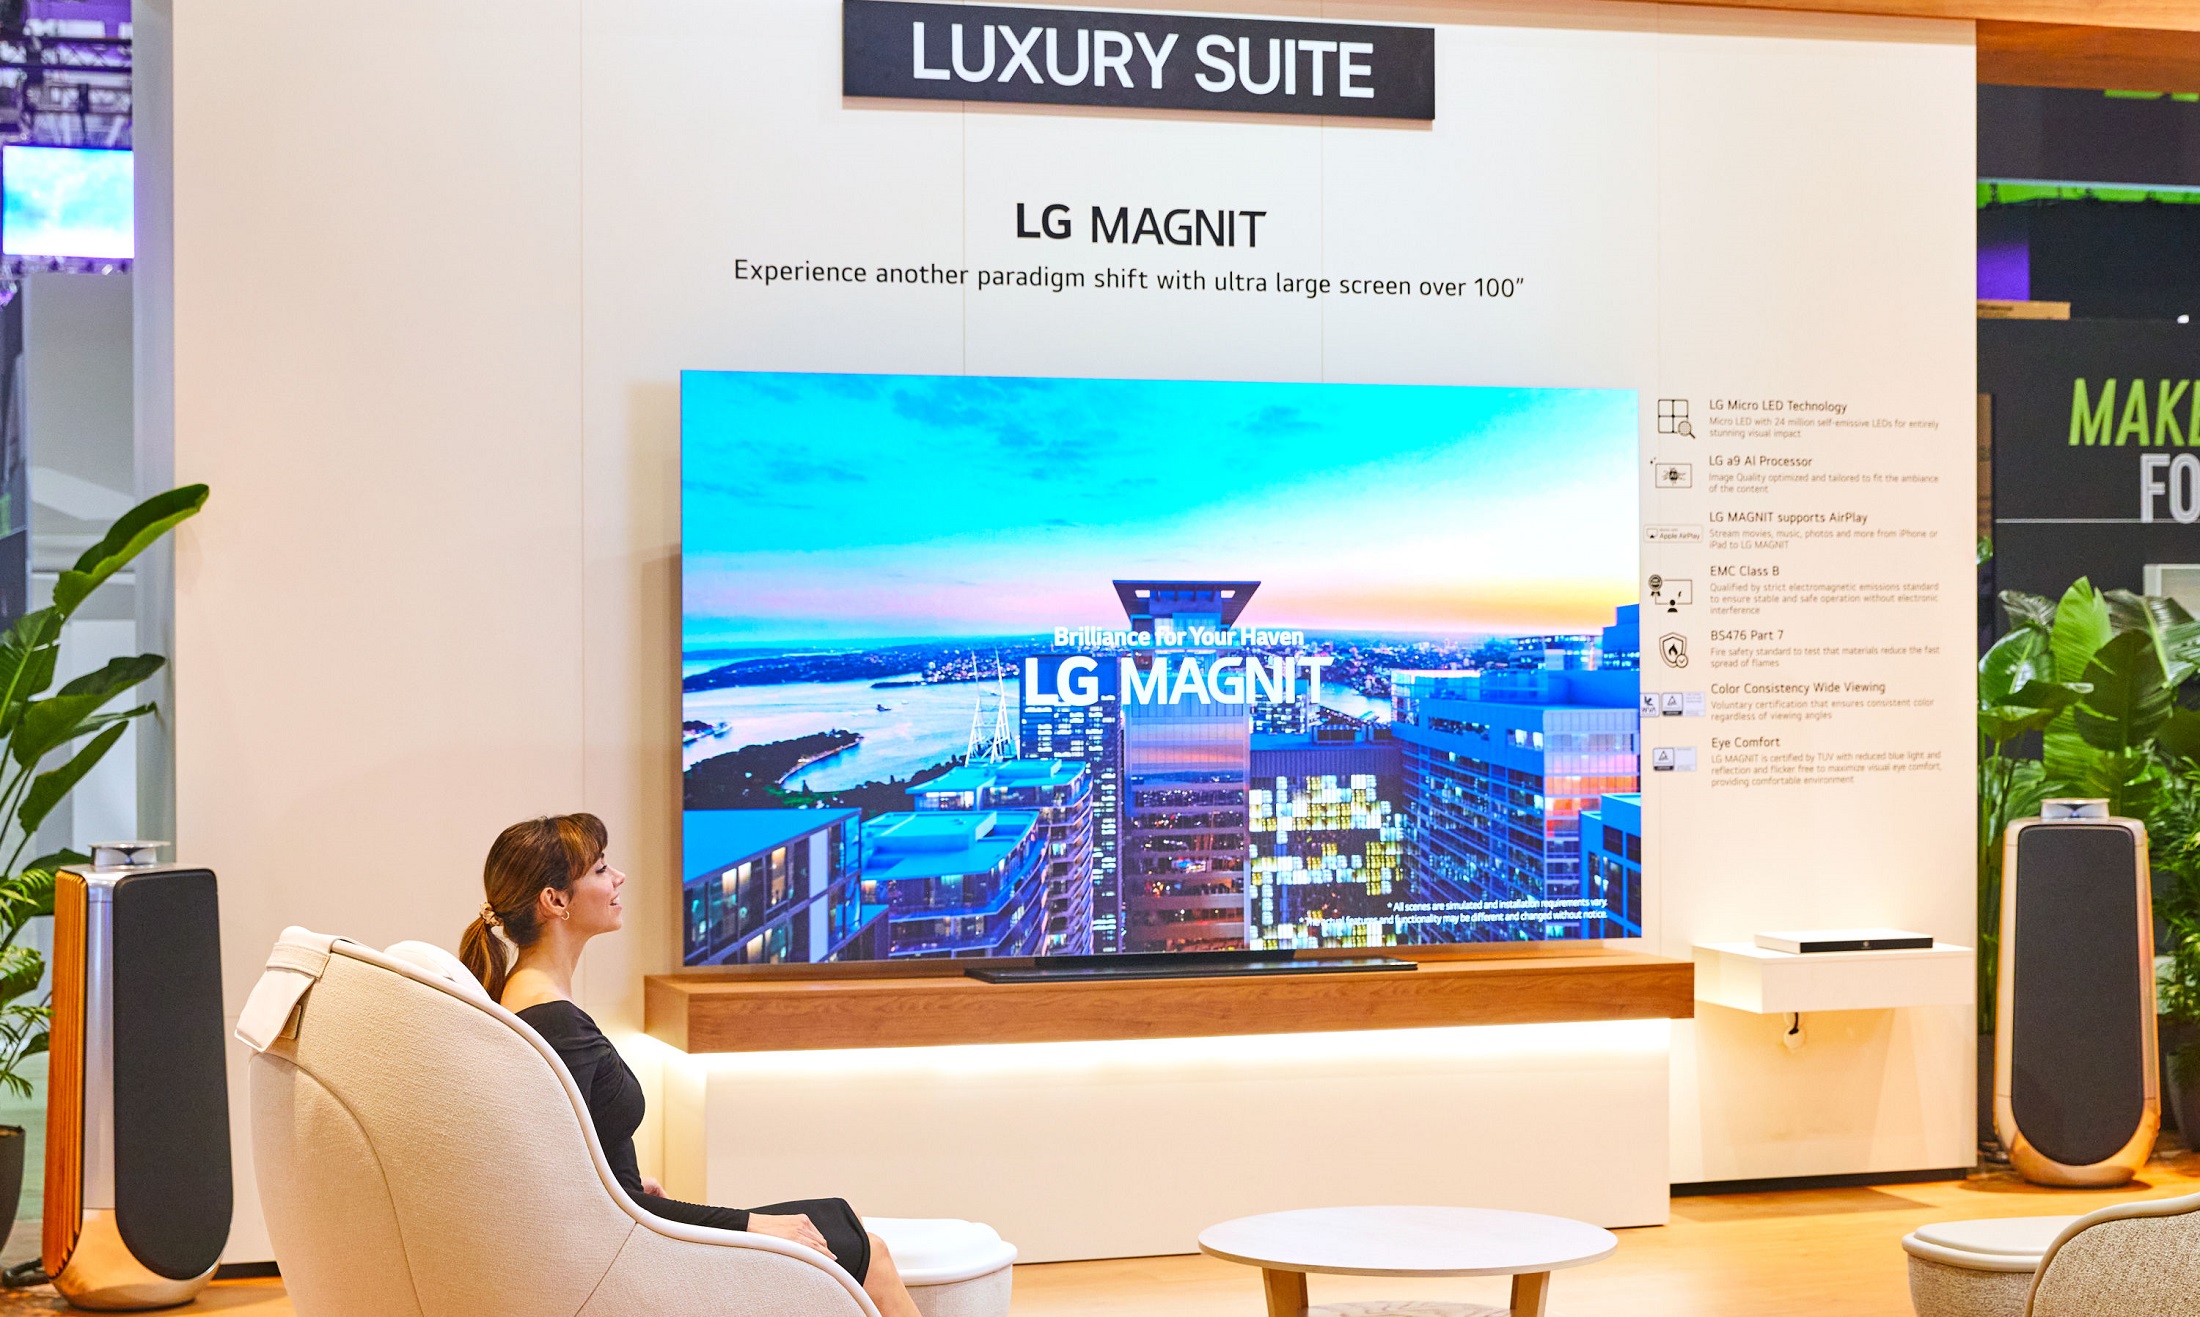 LG’s 118- inch LG MAGNIT TV at Luxury Suite Zone 